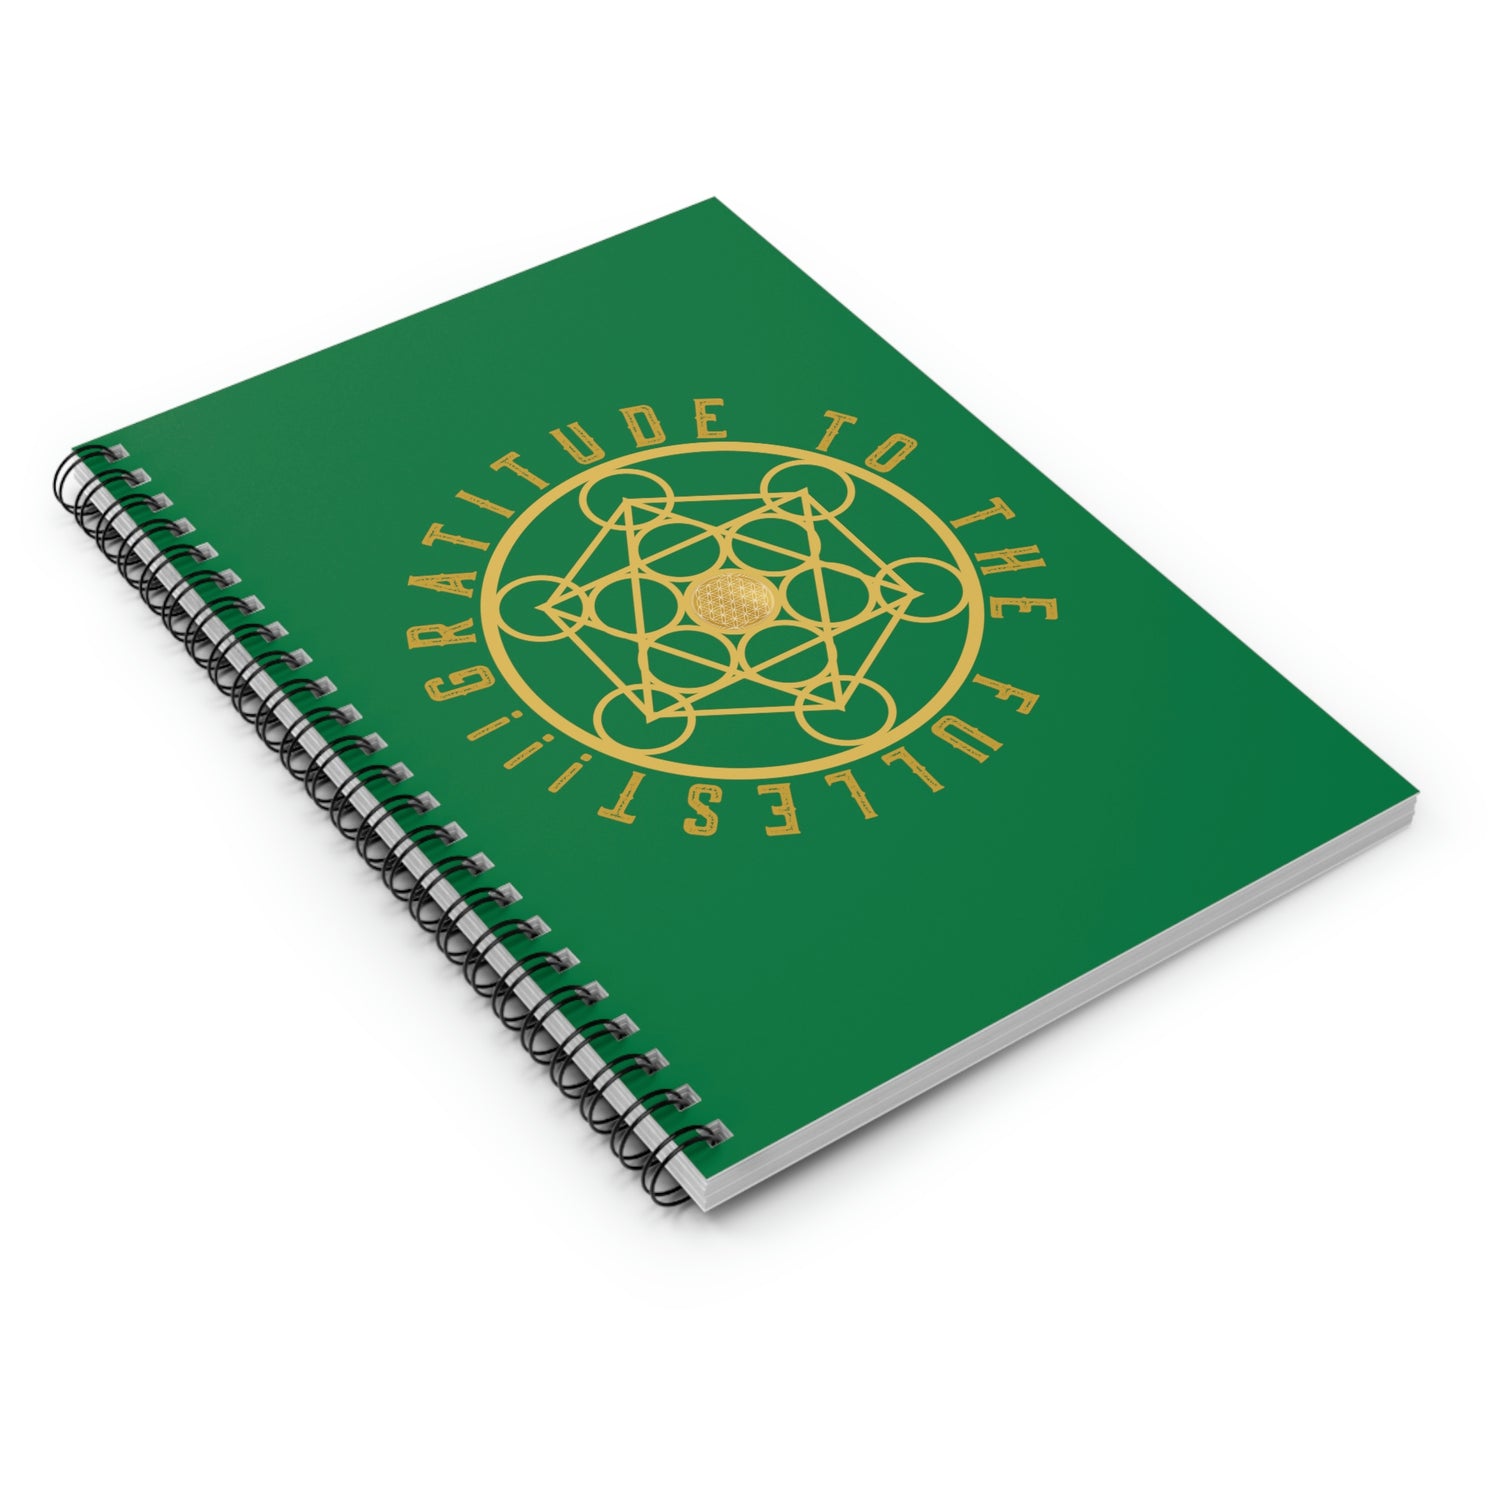 GRATITUDE TO THE FULLEST!!! - Spiral Notebook - Ruled Line - Green